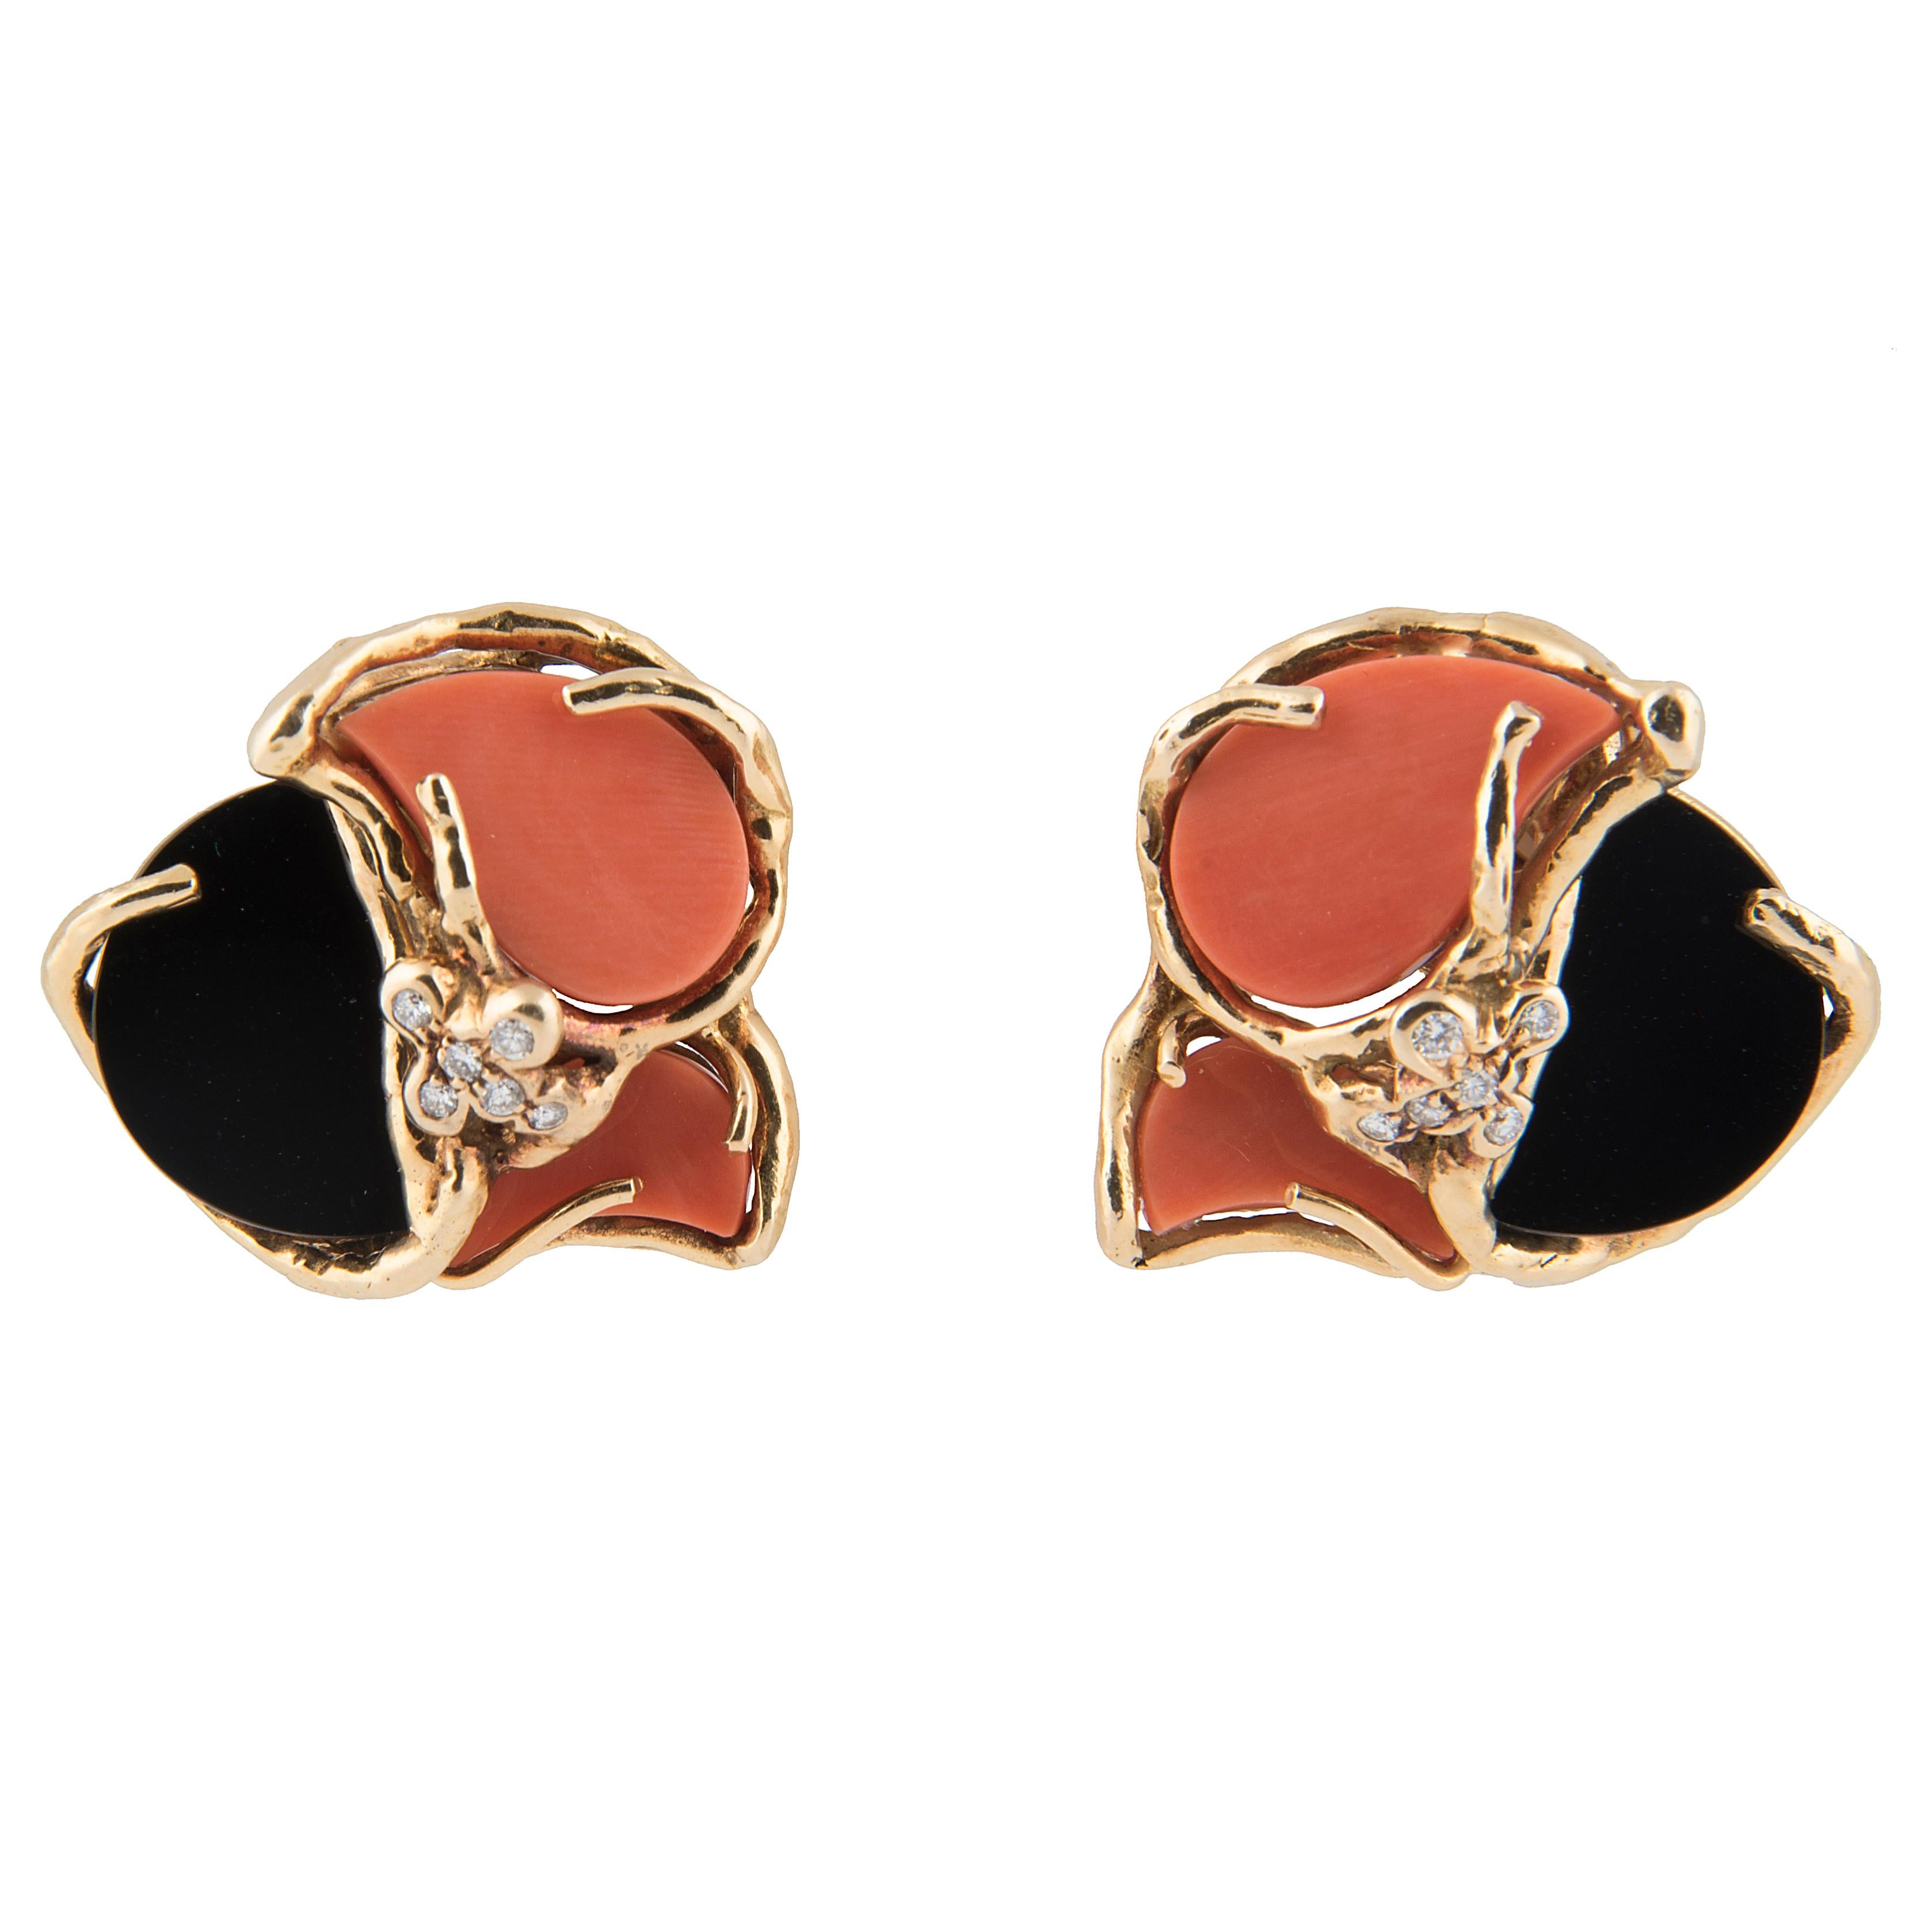 Pair of clip-on earrings by Chaumet, each with one onyx and two coral plaques set in 18k yellow gold mounts set with five diamonds
Signed Chaumet, maker's mark, French hallmarks and numbered 626C
1970's